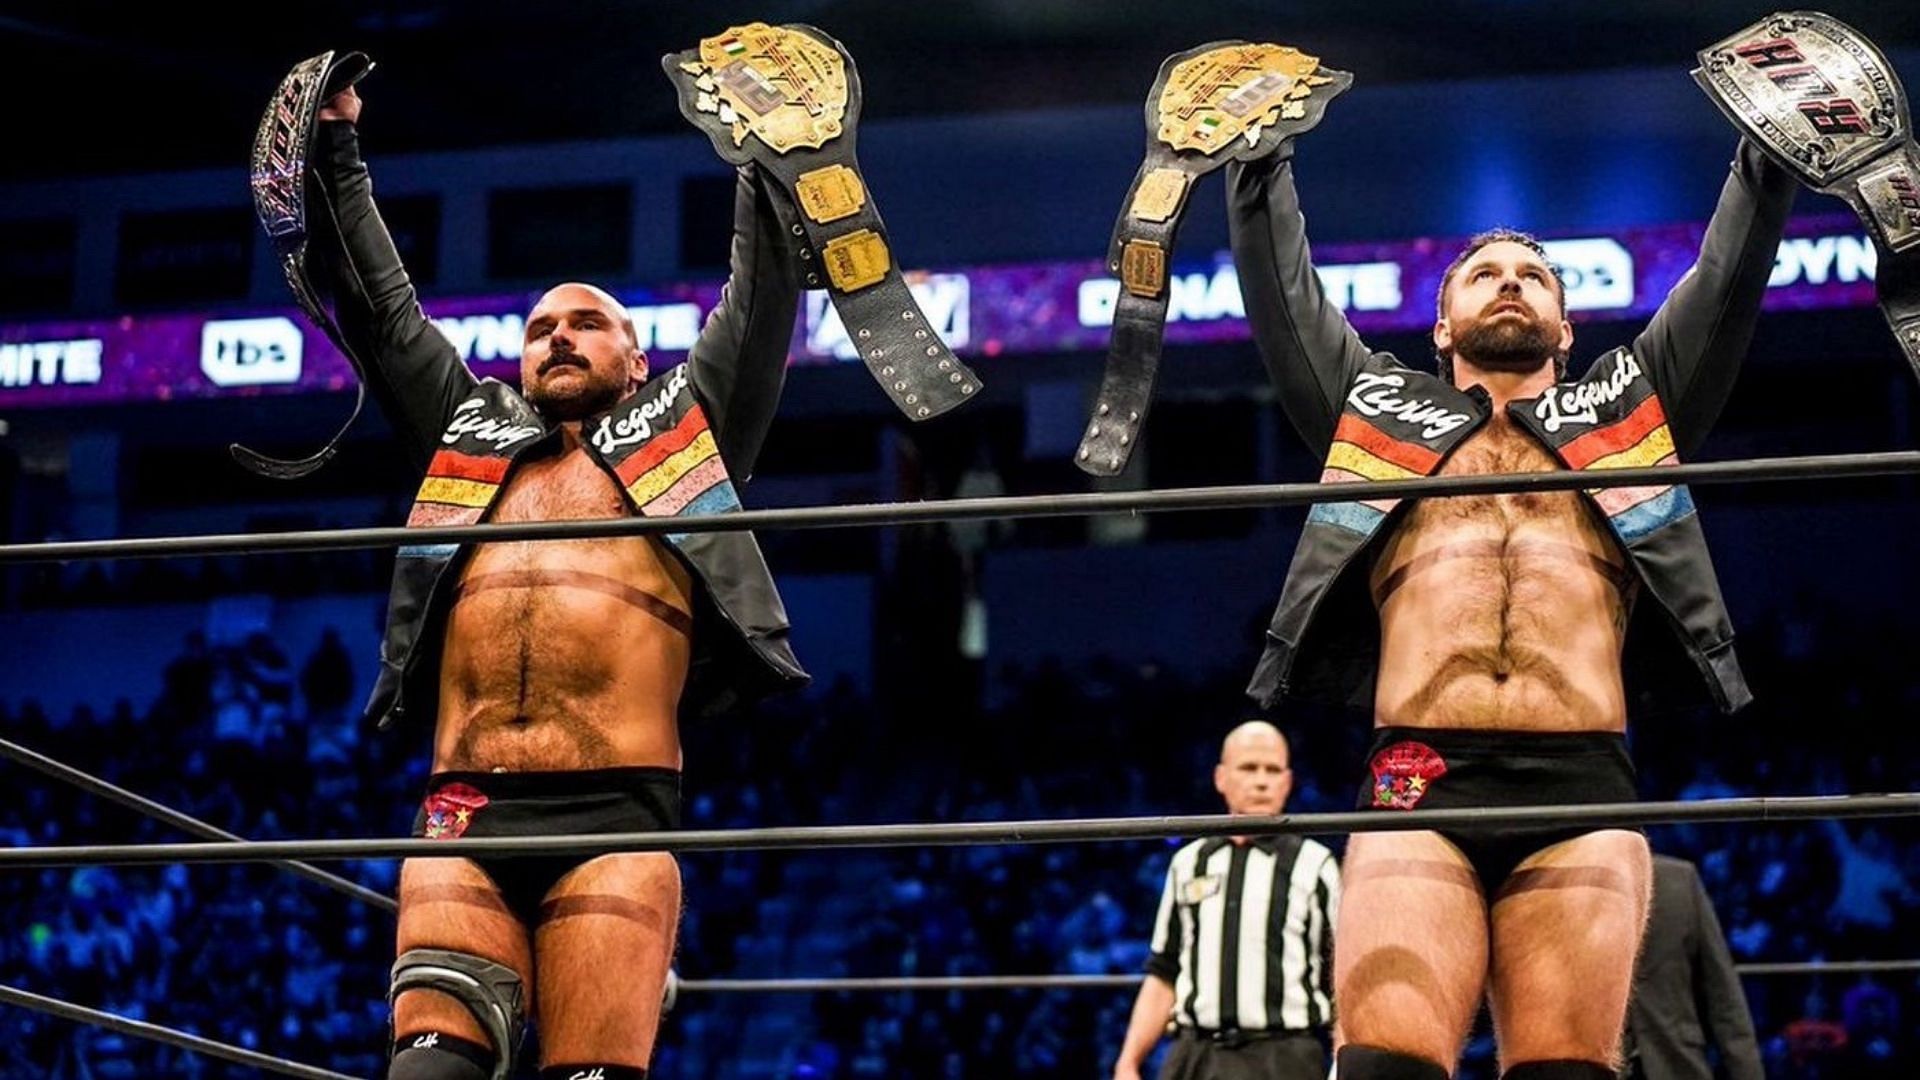 FTR reign as ROH and AAA tag champs